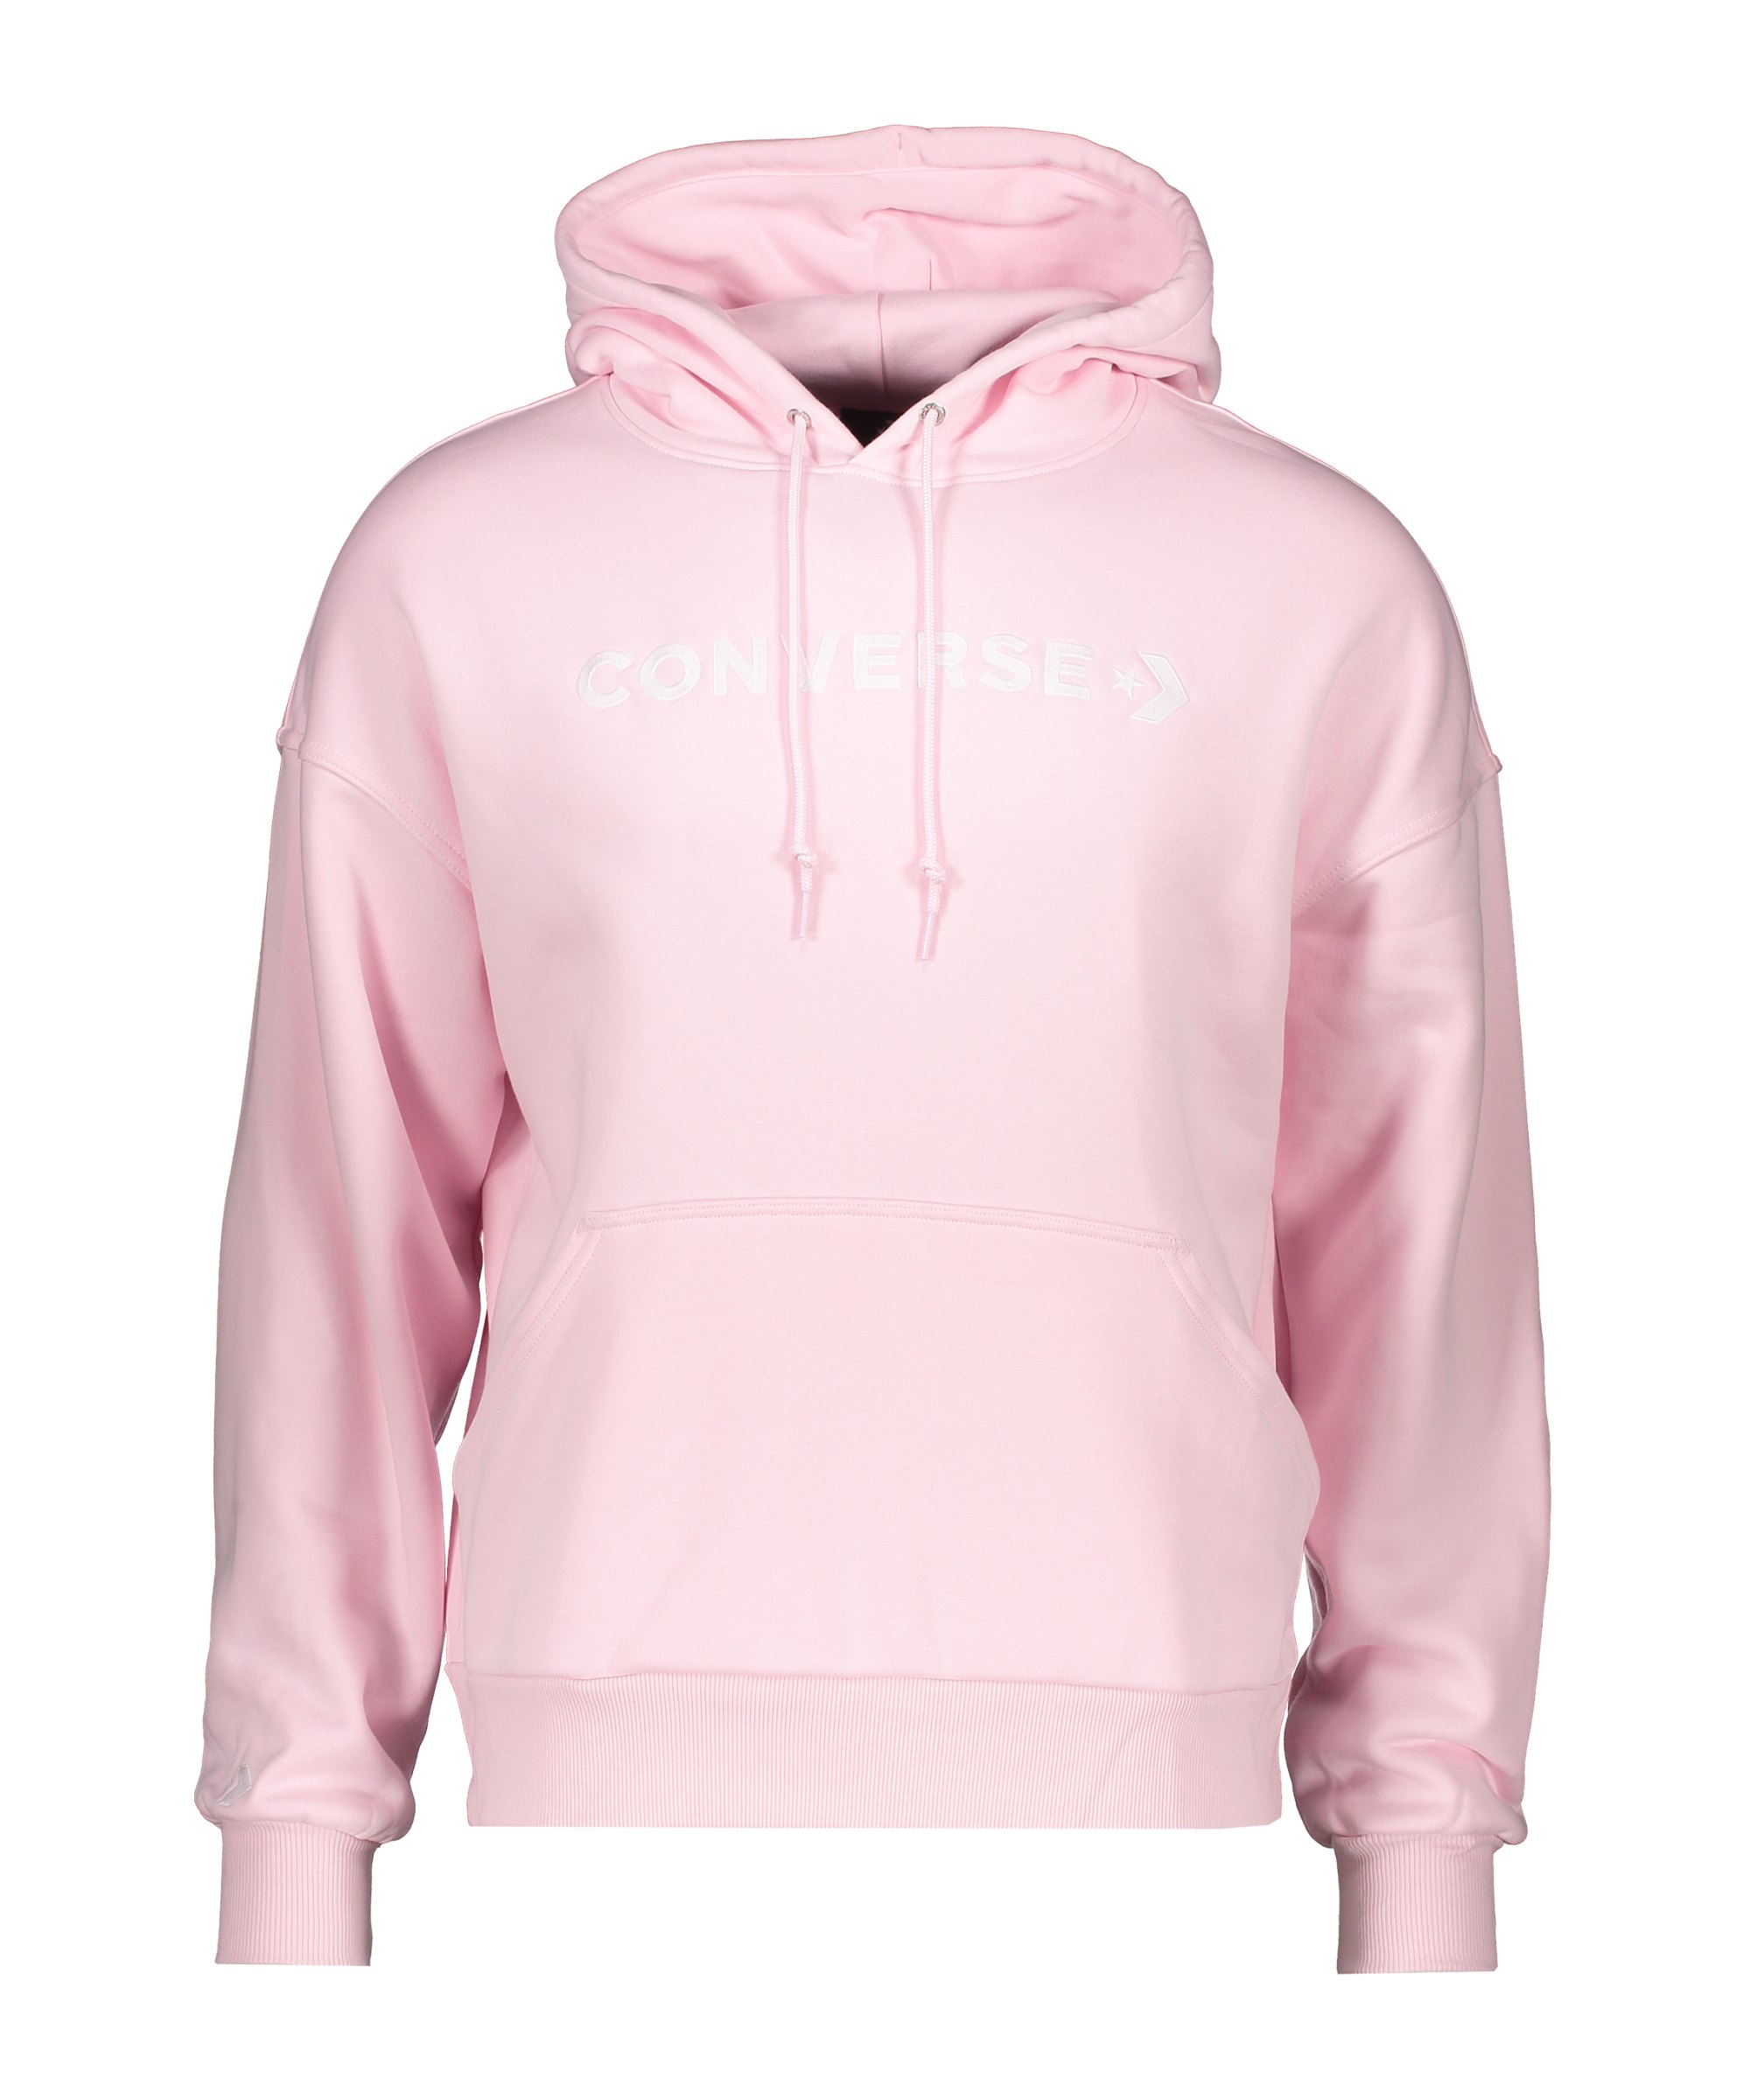 Converse Embroidered Wordmark Hoody Pink F681 - pink